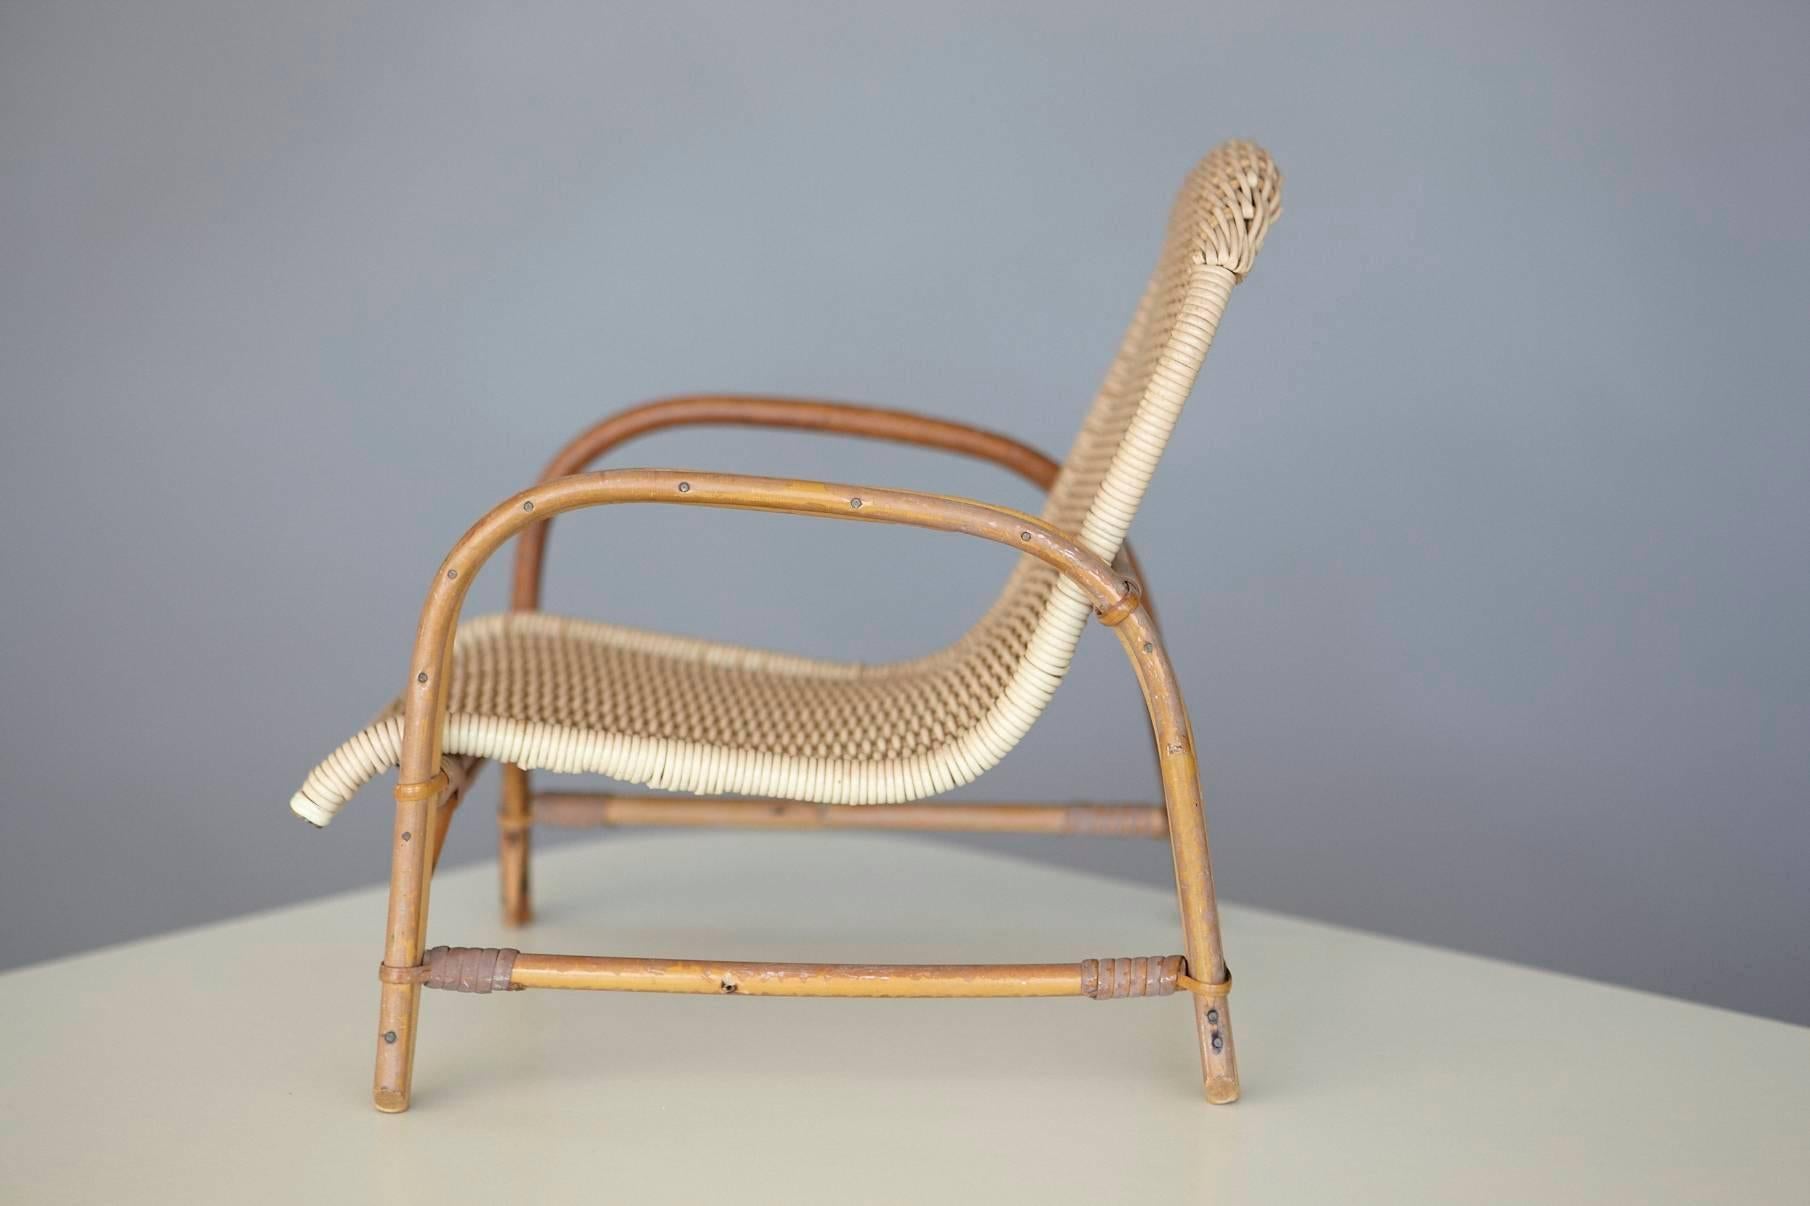 Rare miniature model of a 1960s wicker lounge chair. Rattan base with woven wicker seat.